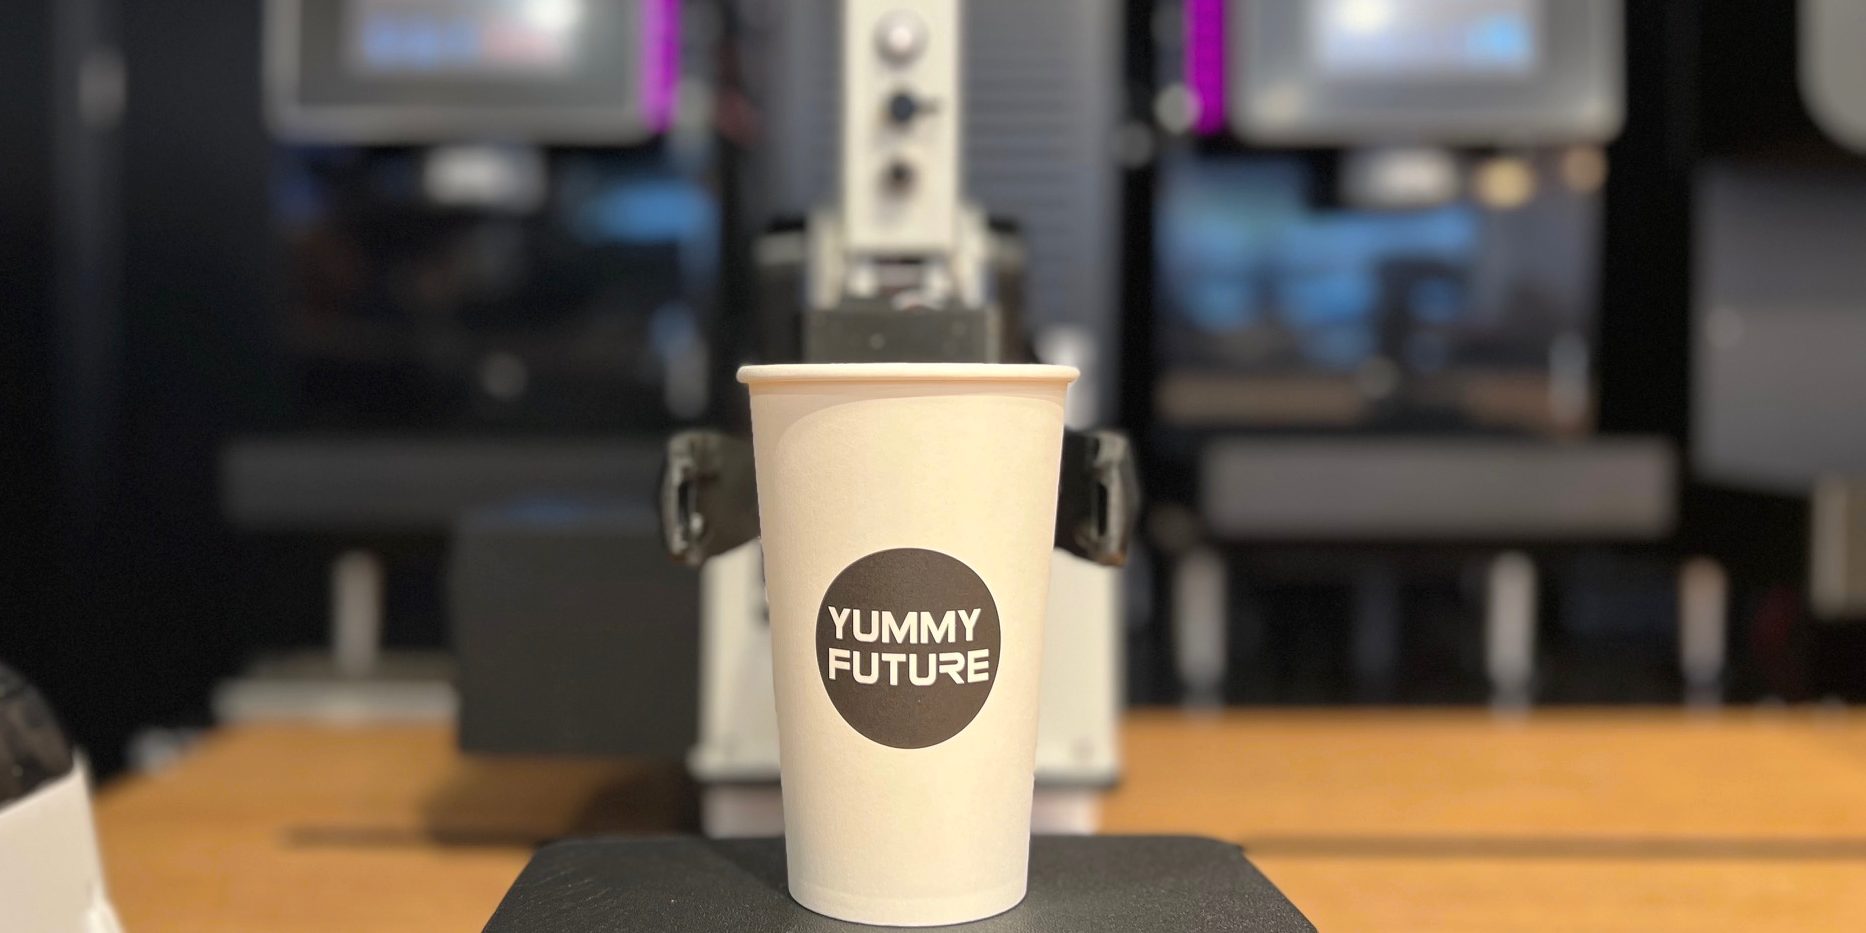 A white cup with "yummy future" on it.